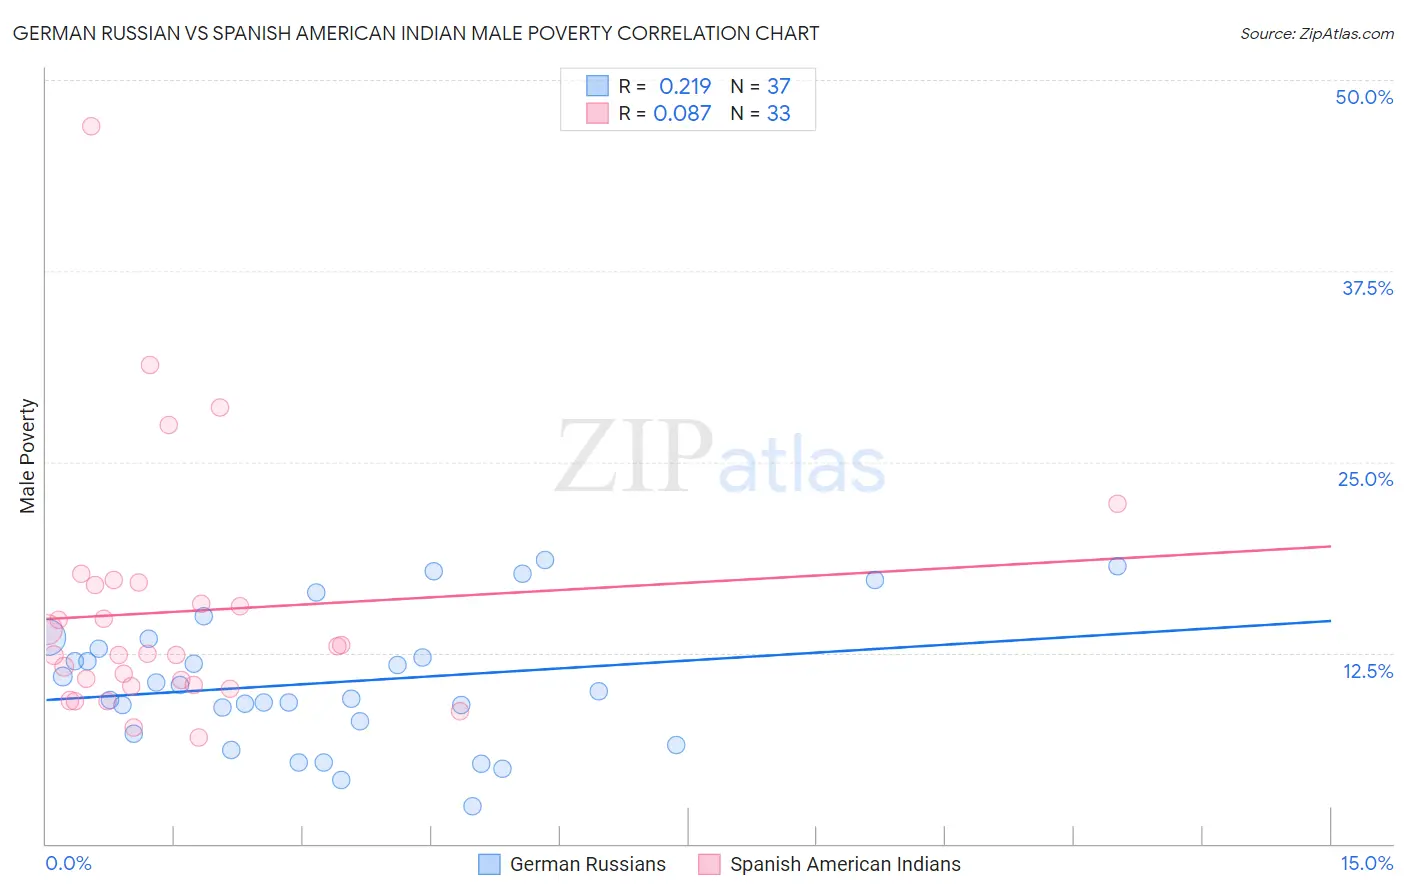 German Russian vs Spanish American Indian Male Poverty